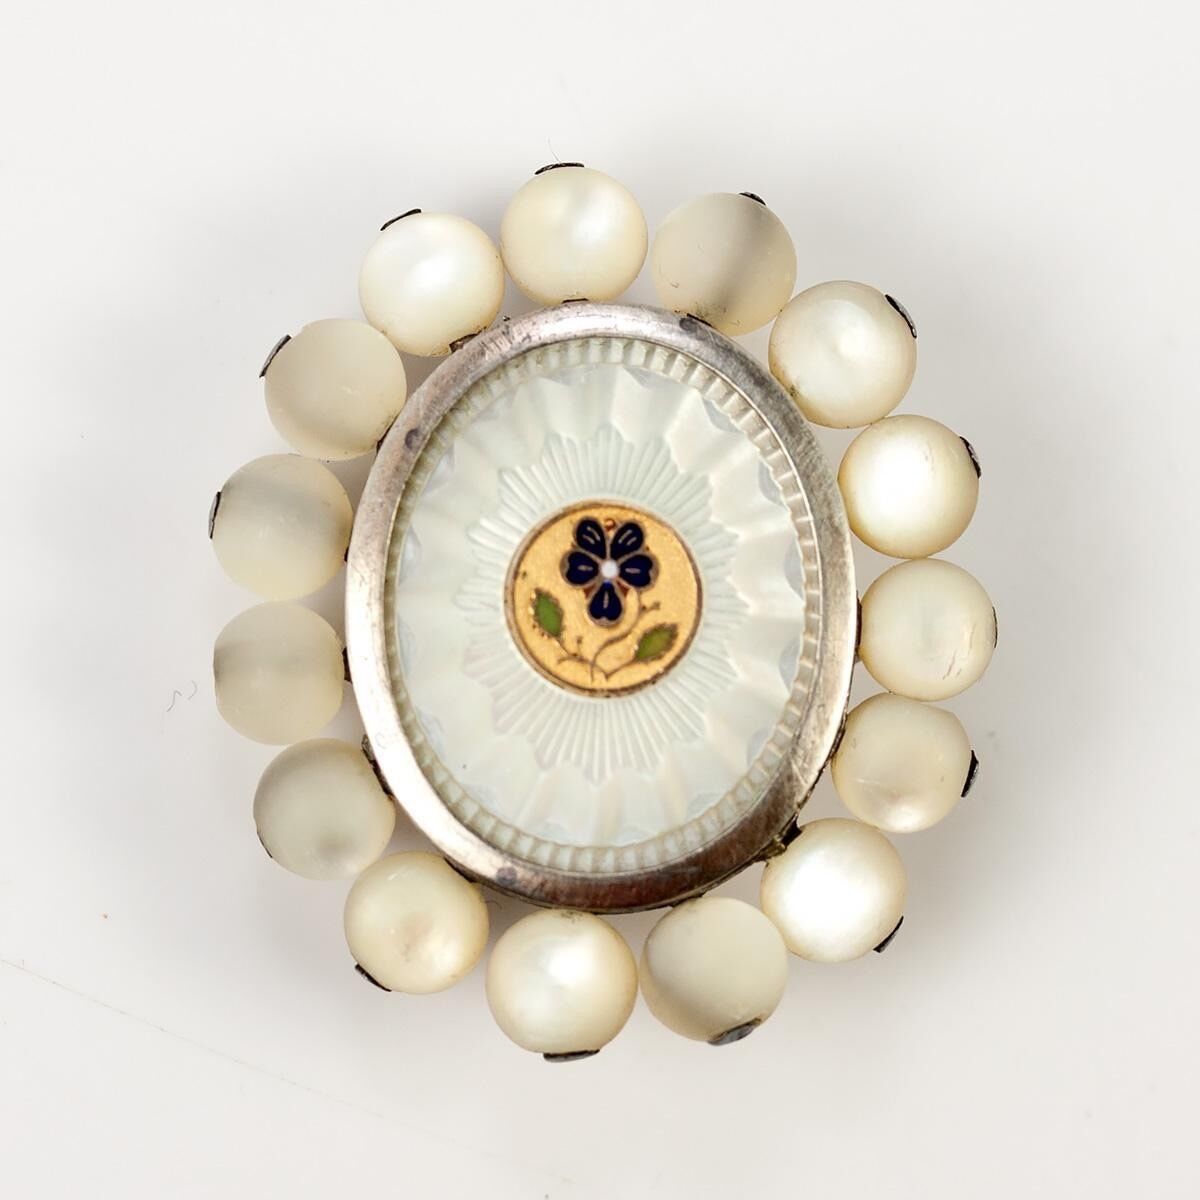 Antique French Empire 18K & Mother of Pearl Palais Royal Jewelry, Stick or Lapel Pin, c.1800-1810